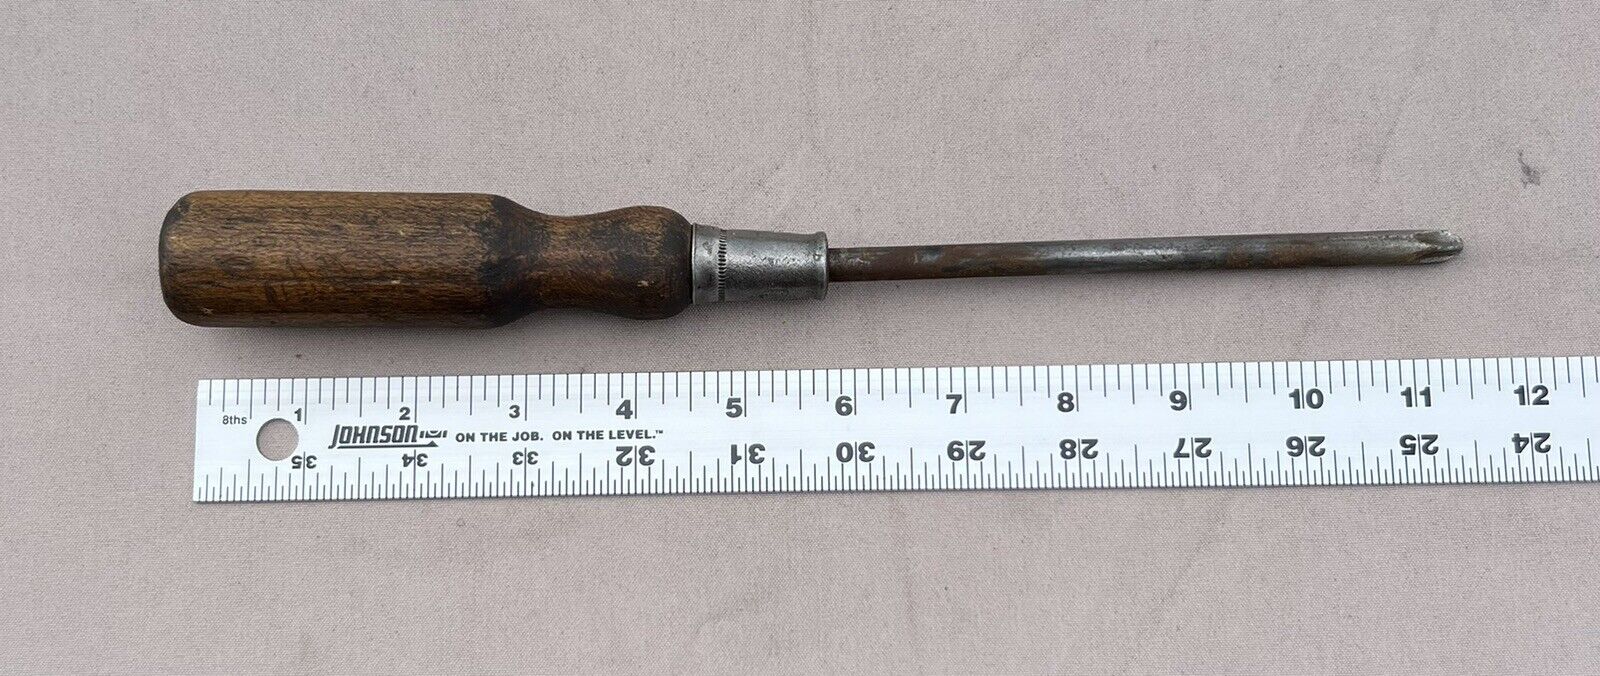 Vintage 11.5” Phillips Screwdriver Wood Handle P1 Phillips Made In USA